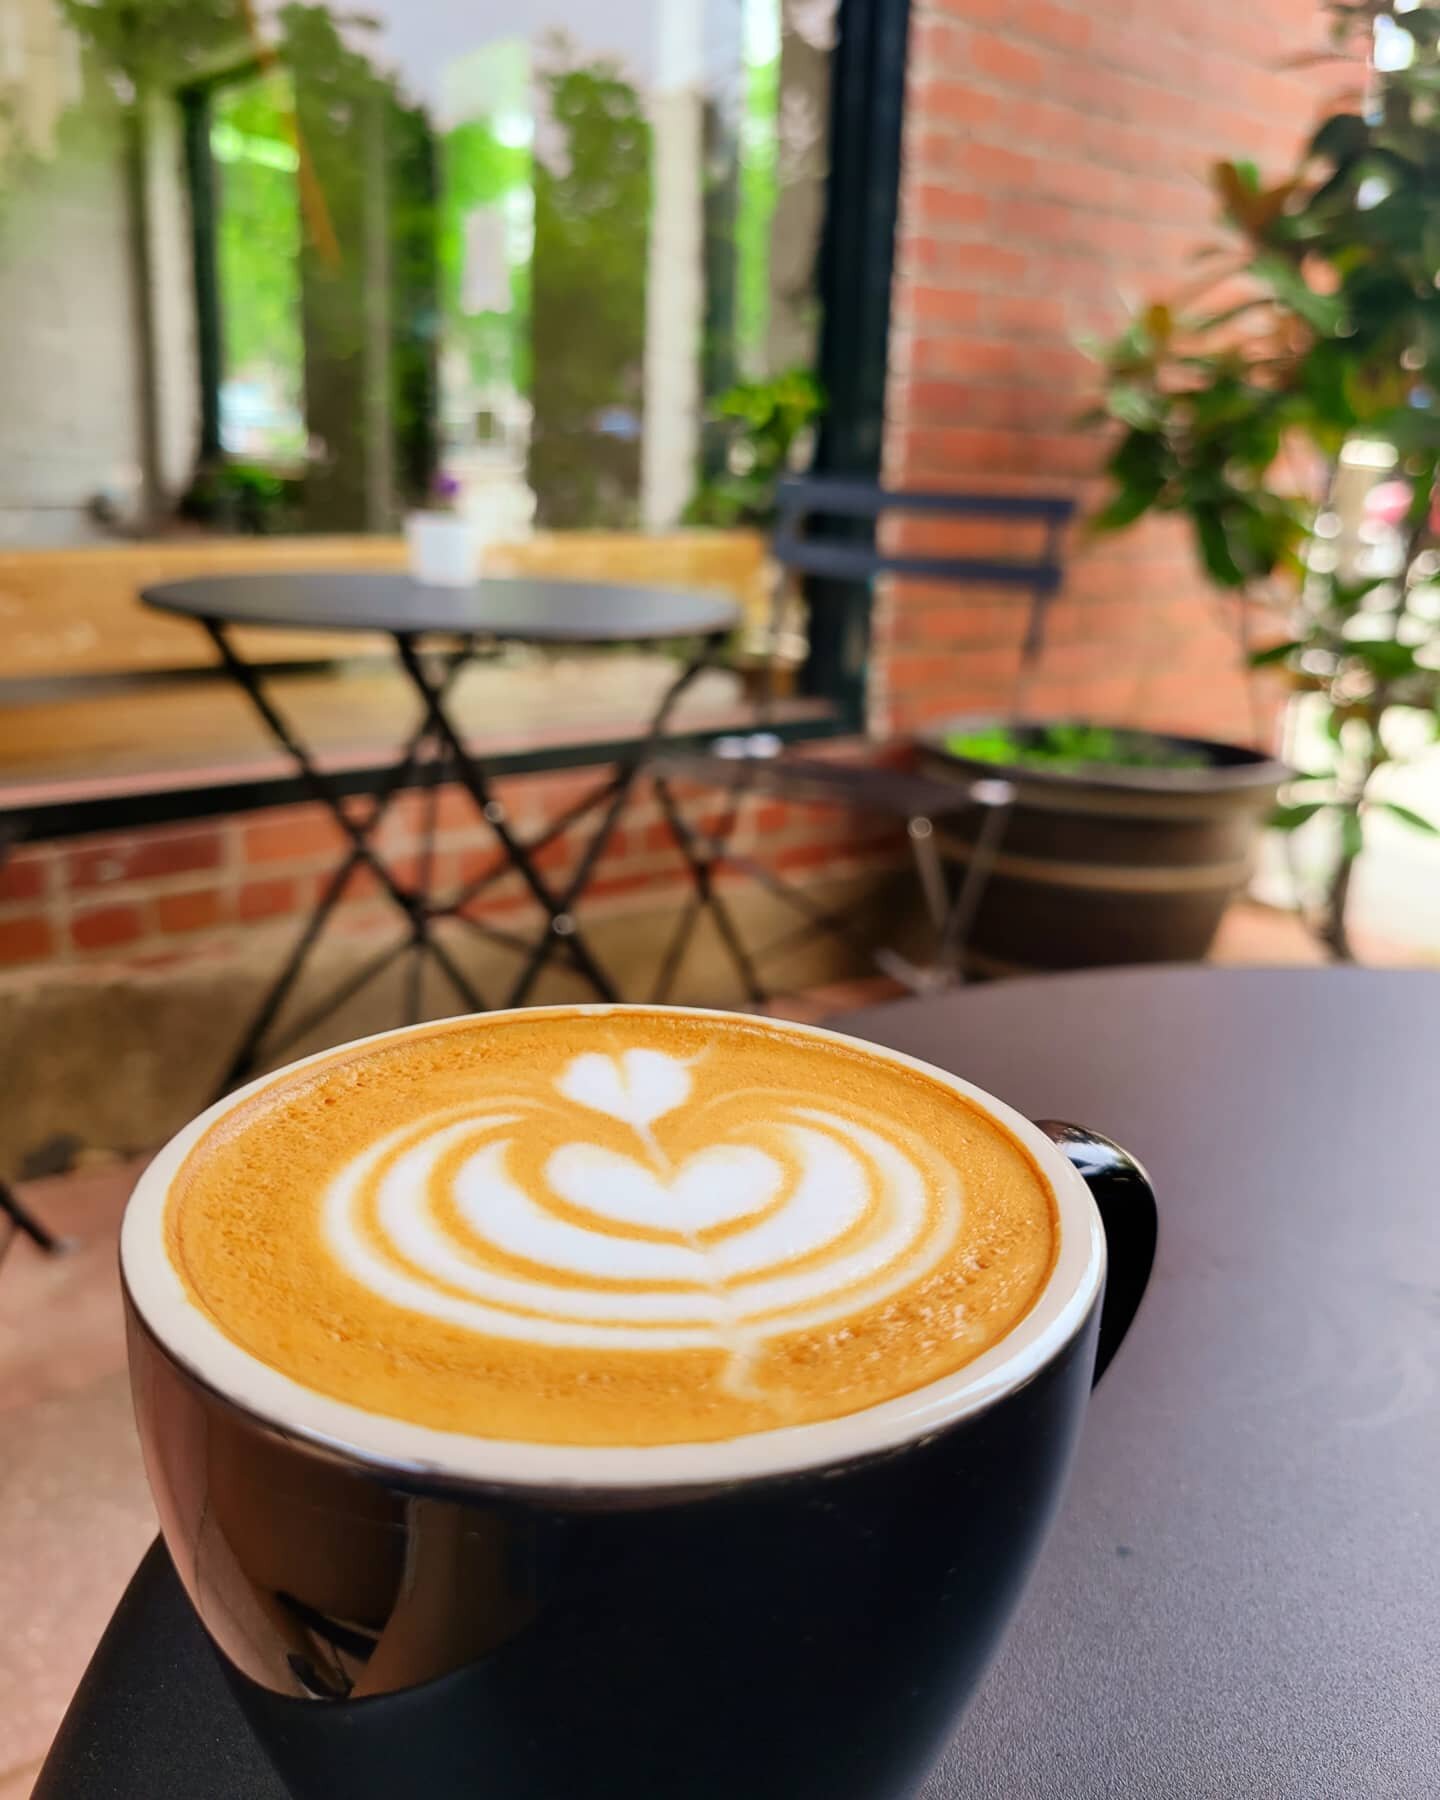 Make a stroll down West Franklin Street a part of your Wednesday plans ☀
Be sure to stop in for a handcrafted espresso drink to keep you company on your walk!